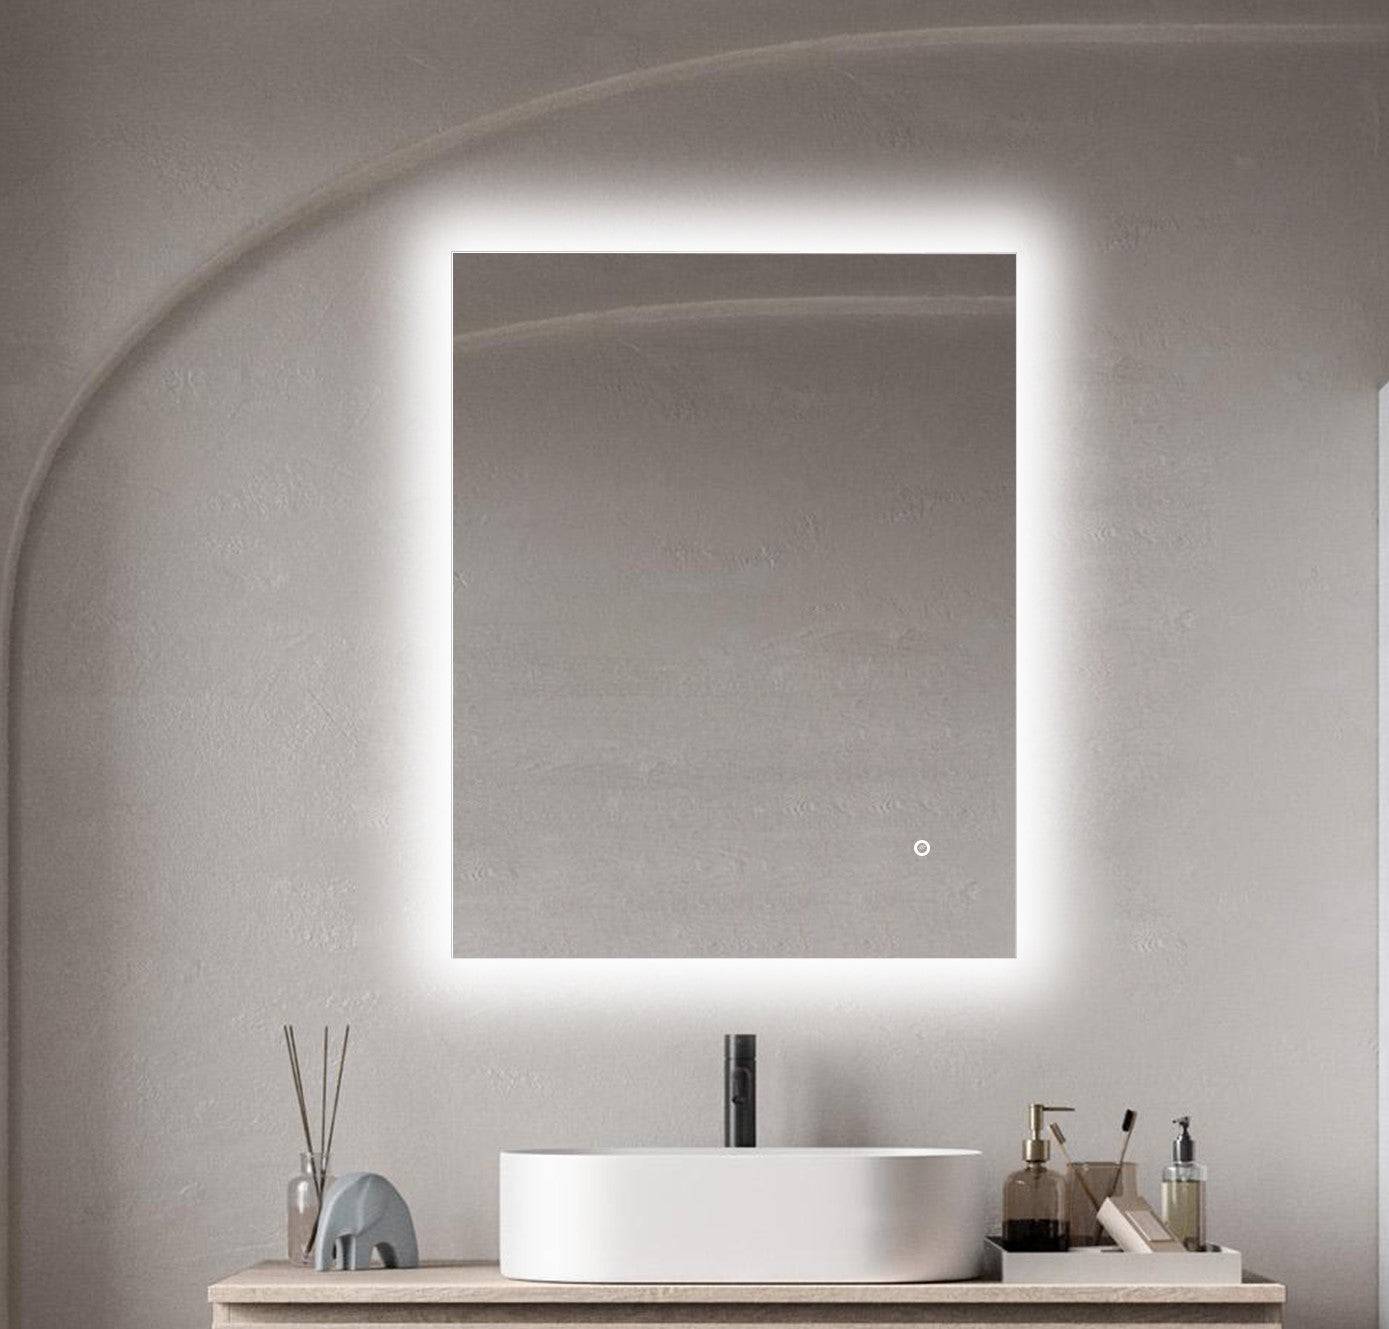 ELL Corona Series - LED Wall Glow Bathroom Mirror with Adjustable Color Temperature, Defogger, Touch Switch, and Hardwired Design - 5mm Tempered Glass with Safety Film, ETL Listed & IP44 Rated - Vertical or Horizontal Mounting - Eco LED Lightings 